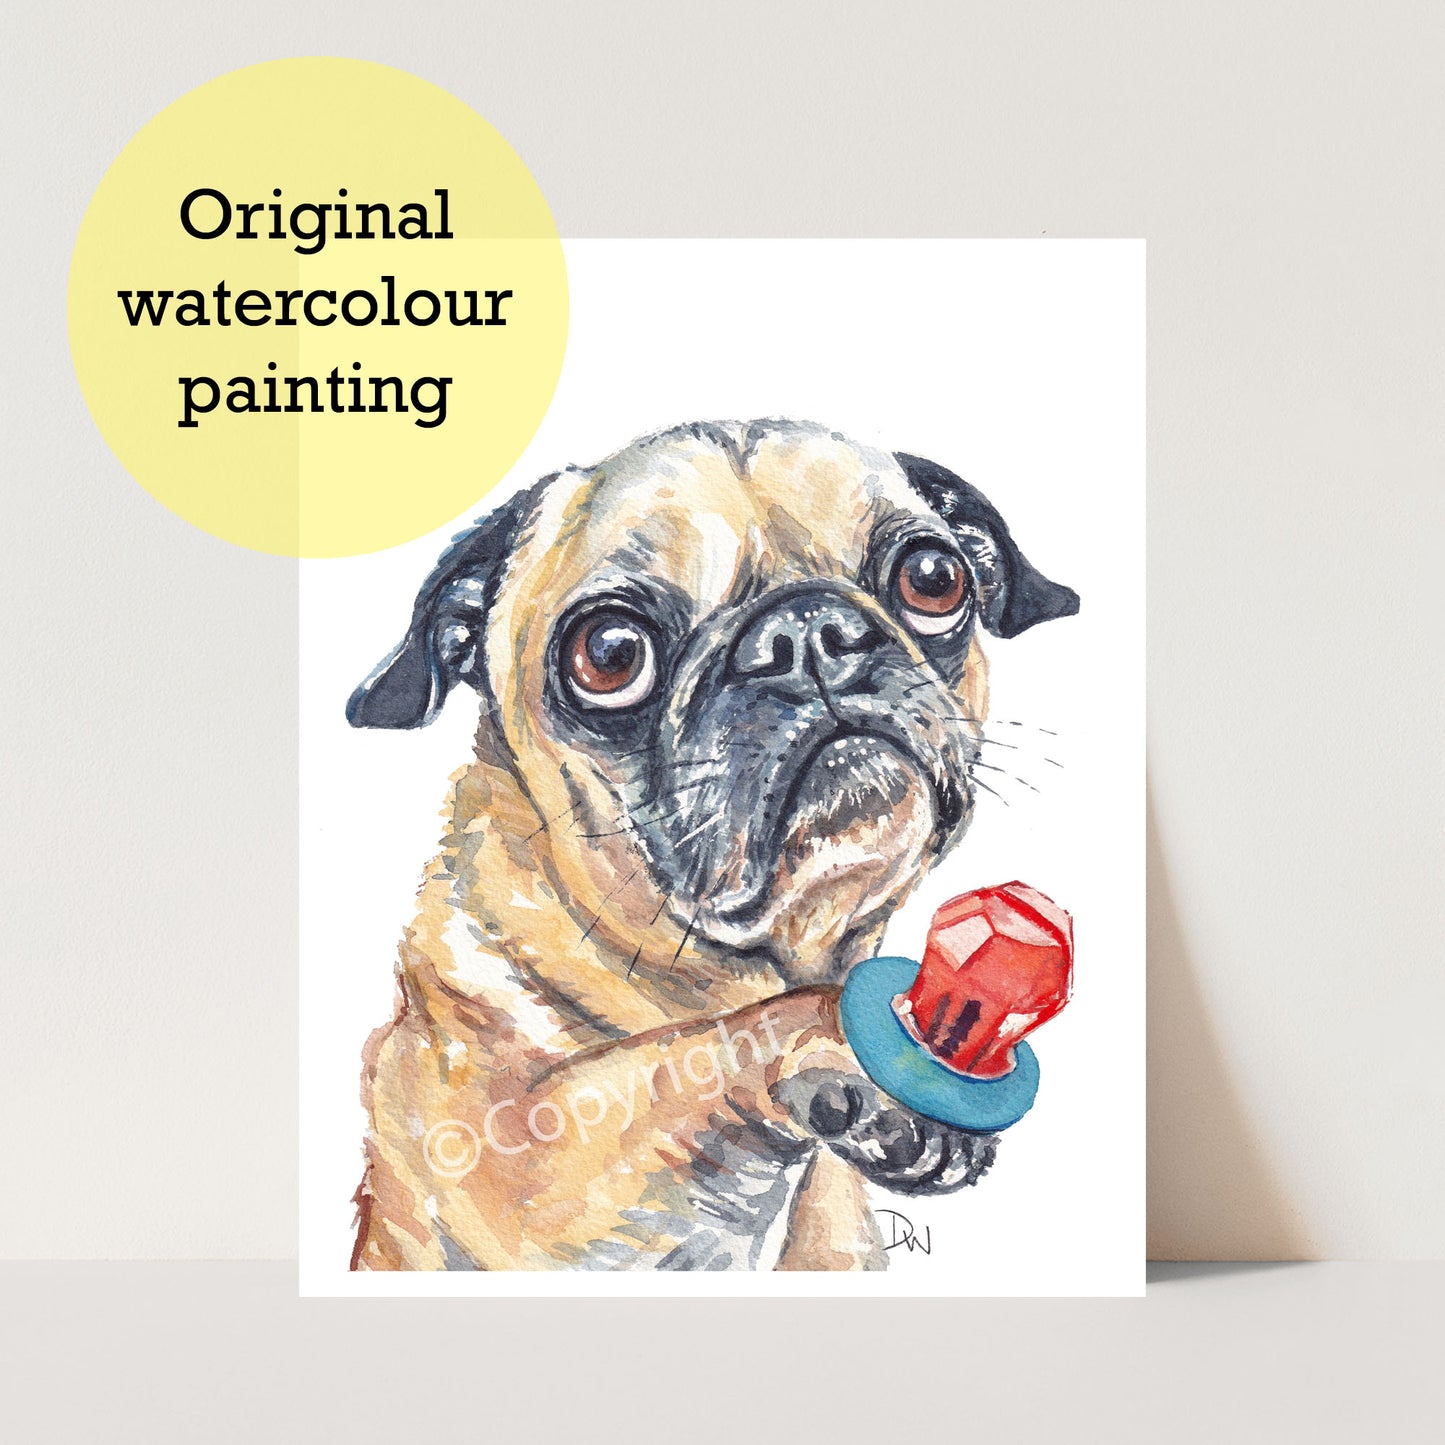 Original watercolour painting of an adorable pug dog offering to share his candy. Art by Deidre Wicks